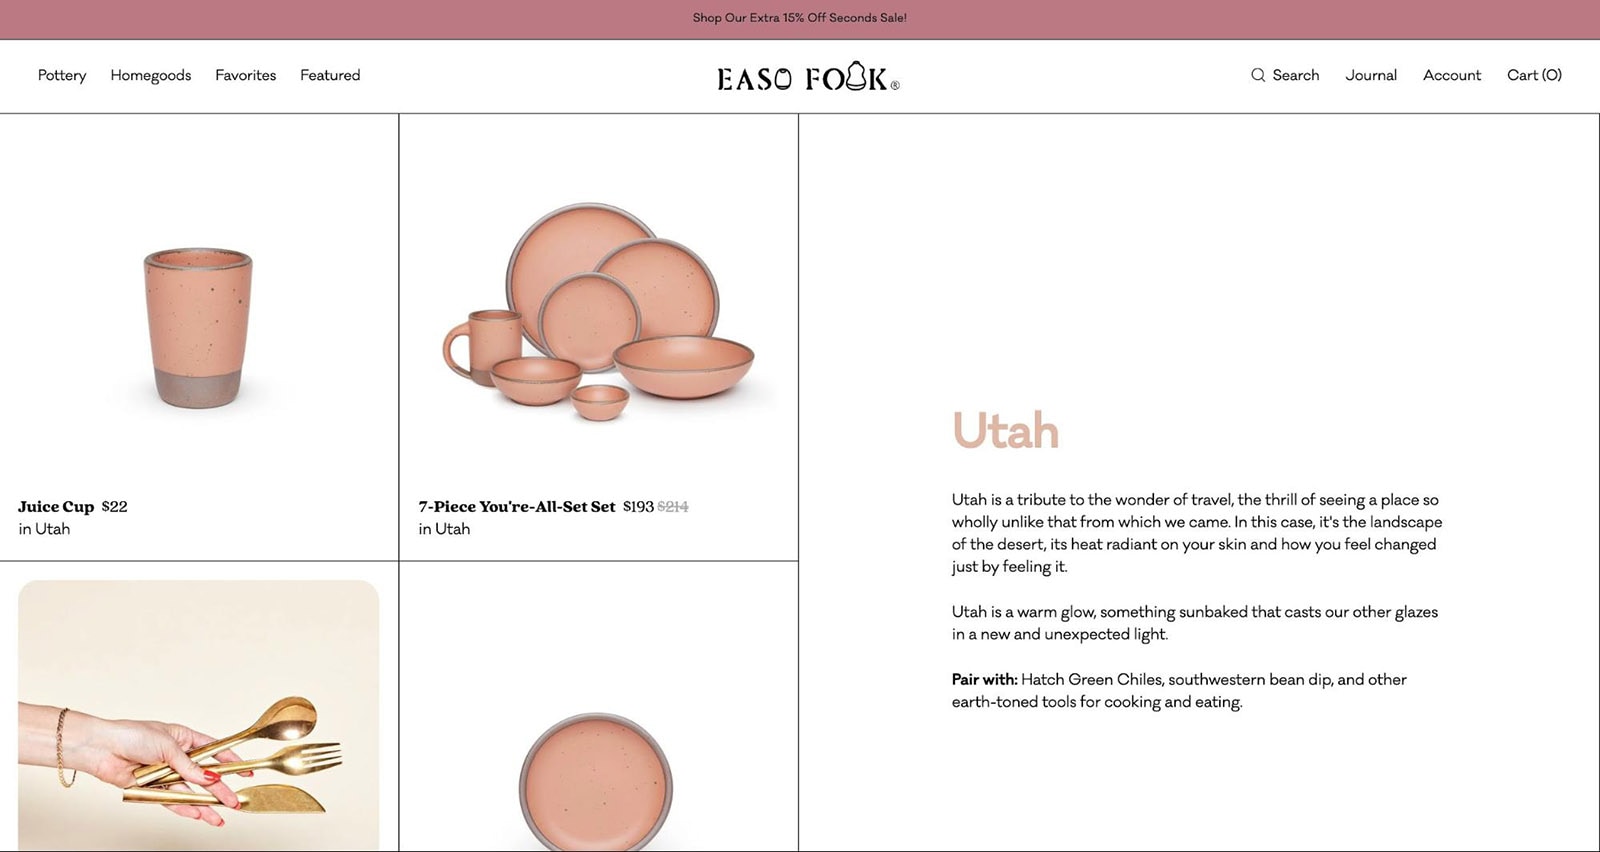 east fork utah collection products descriptions